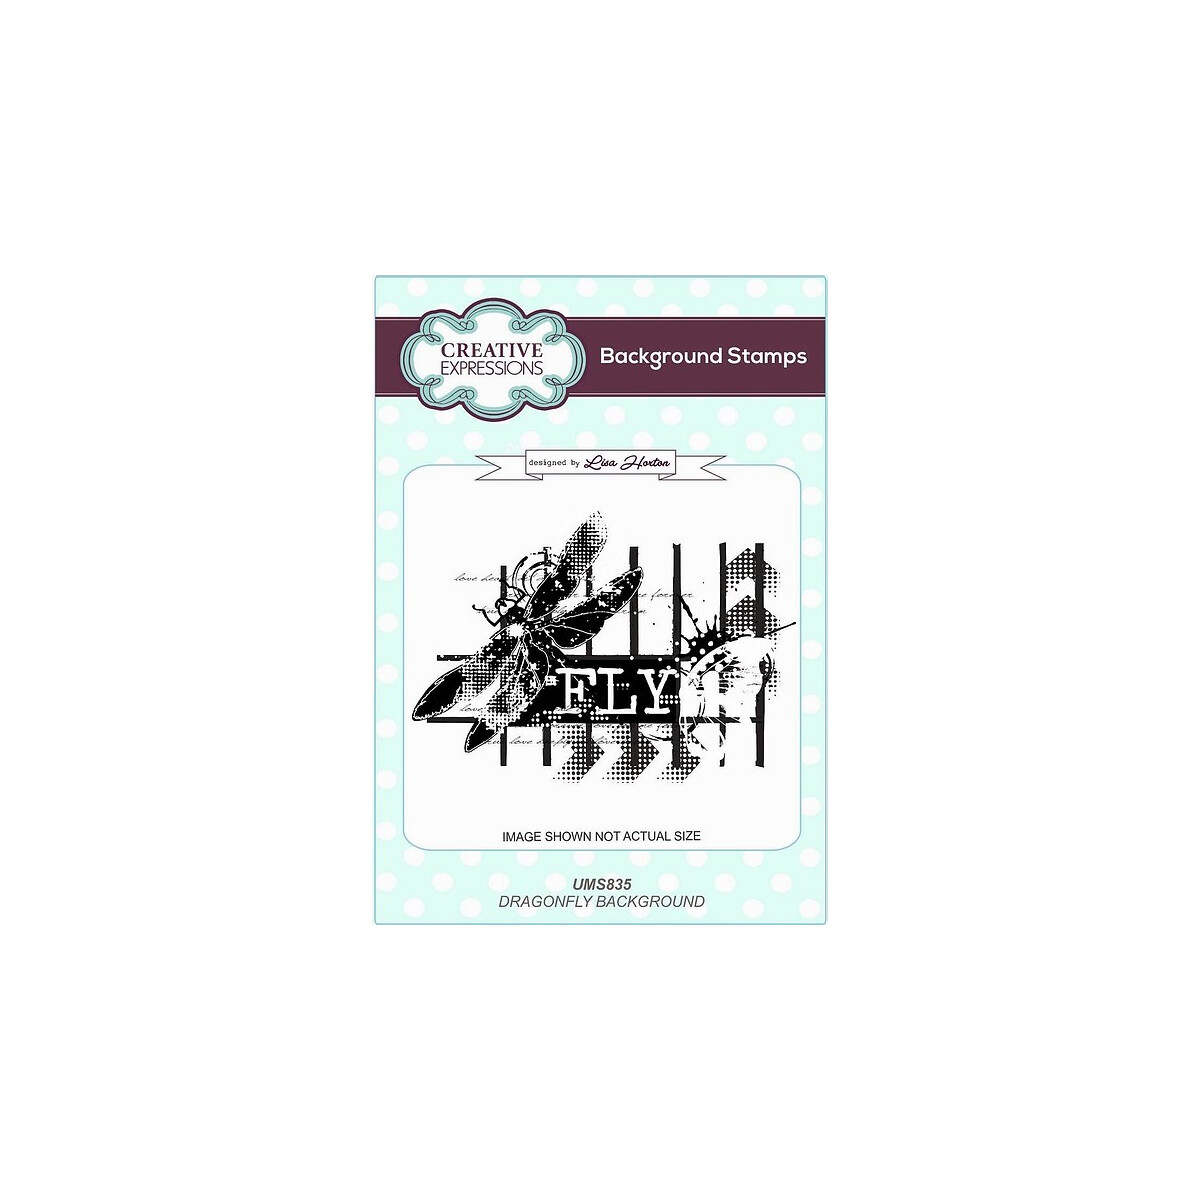 Creative Expressions Cling Stamp - Motivstempel...